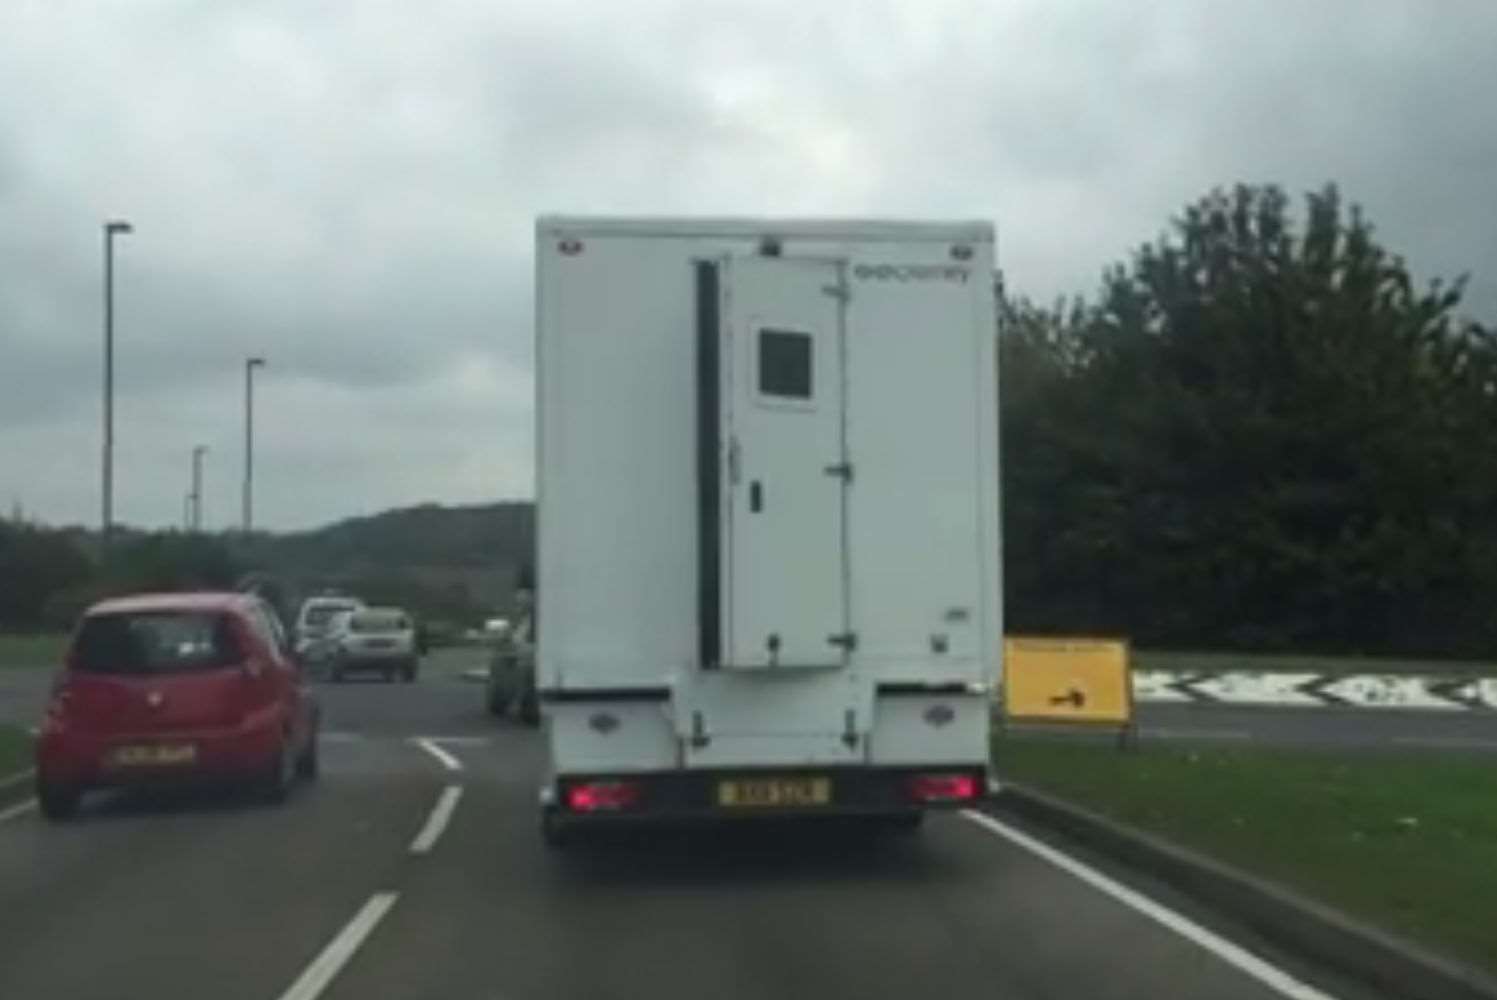 The door can be seen ajar as the van approaches a roundabout